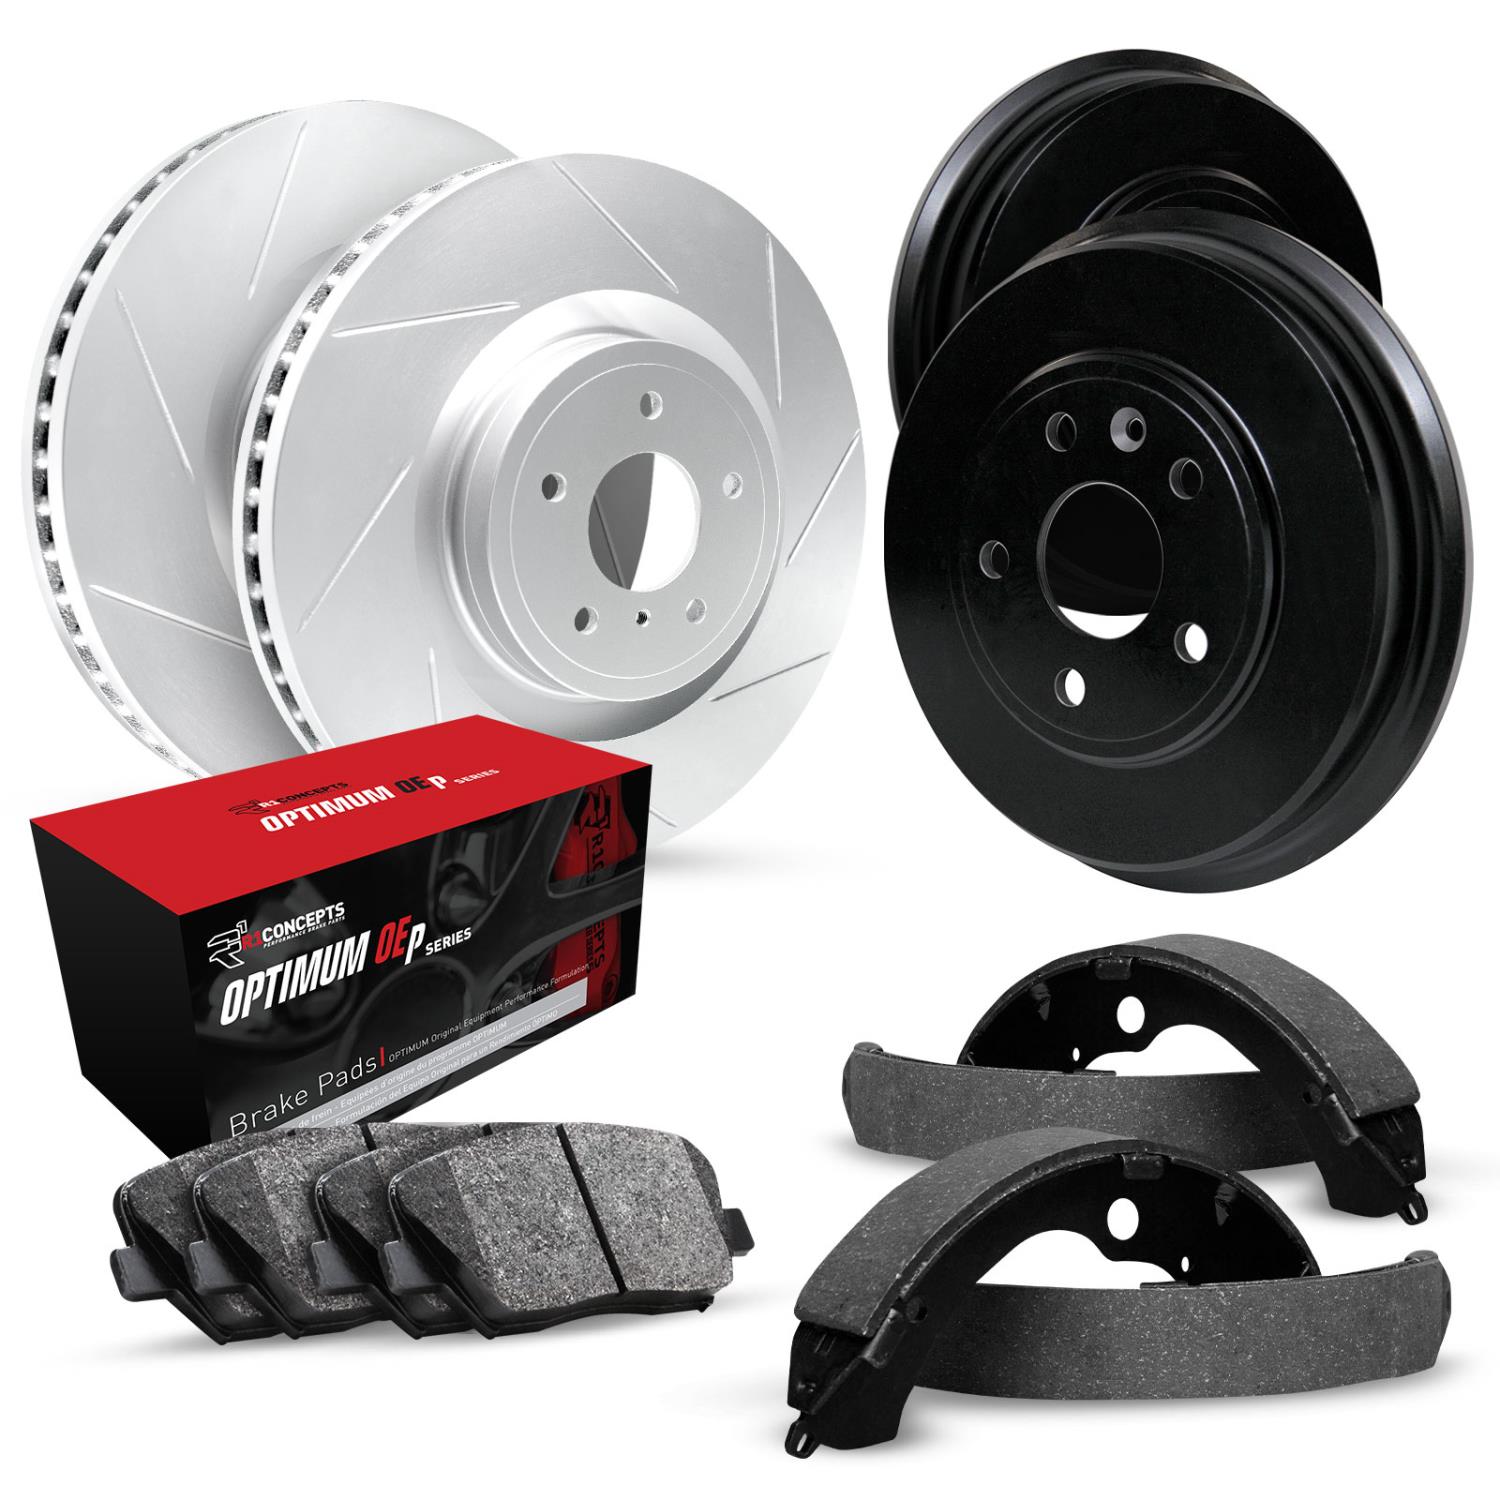 GEO-Carbon Slotted Brake Rotor & Drum Set w/Optimum OE Pads & Shoes, 1991-1993 GM, Position: Front & Rear